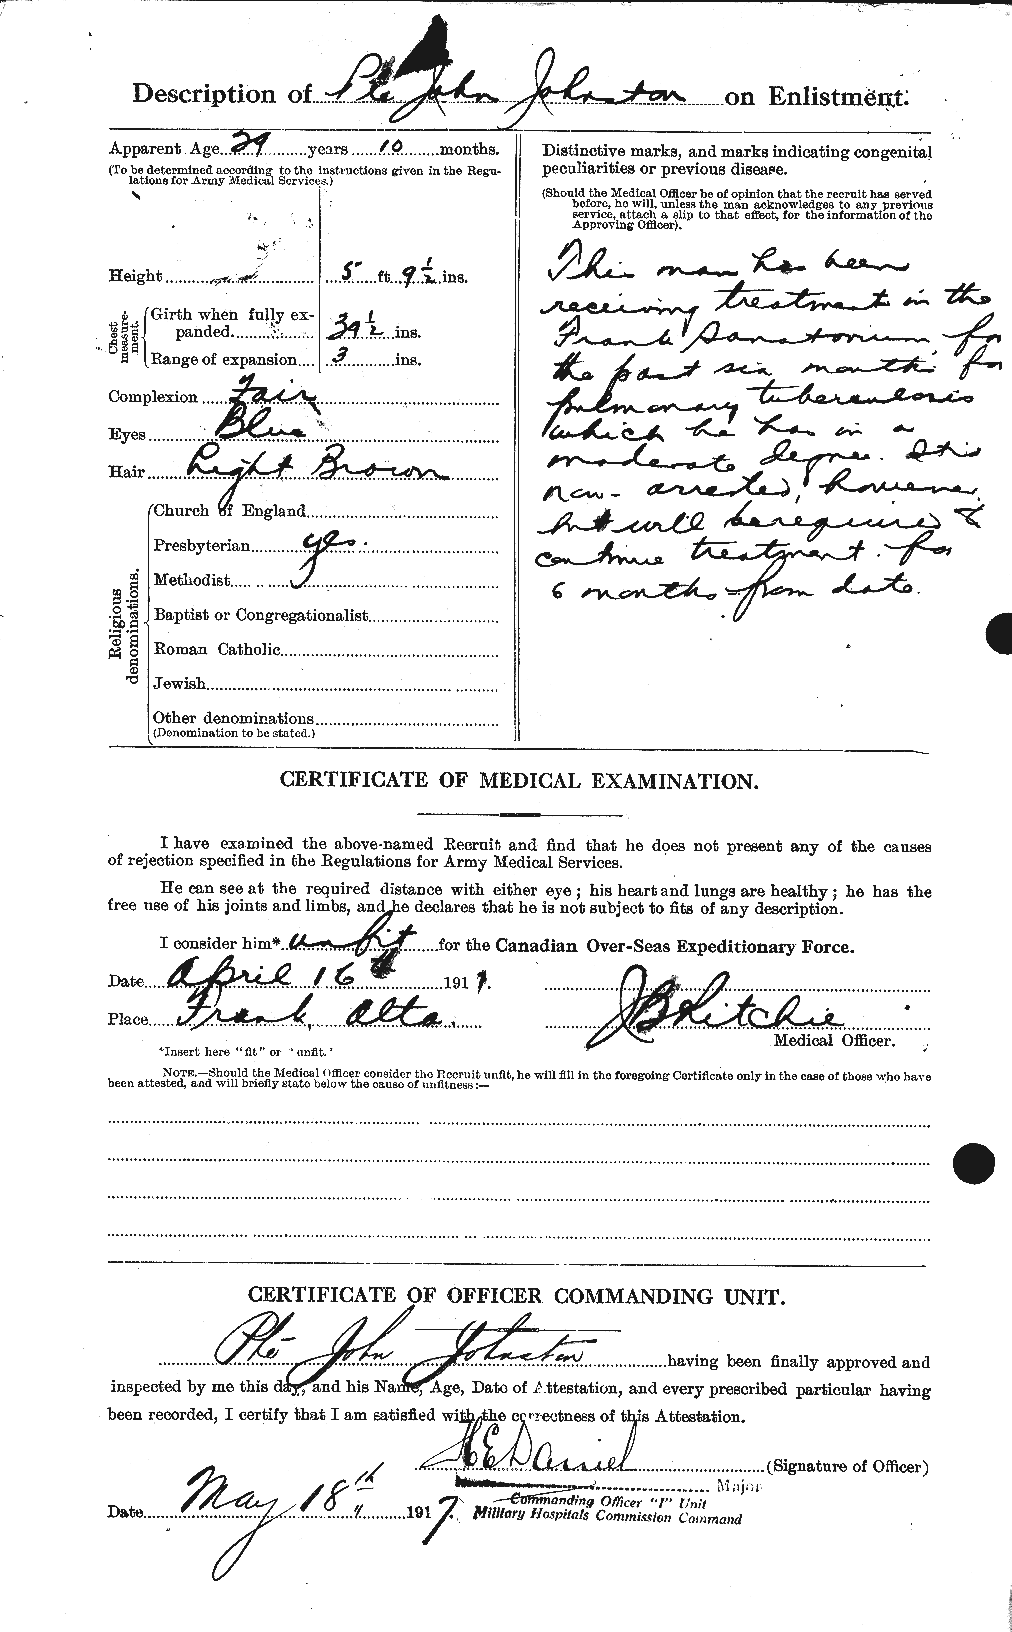 Personnel Records of the First World War - CEF 422796b